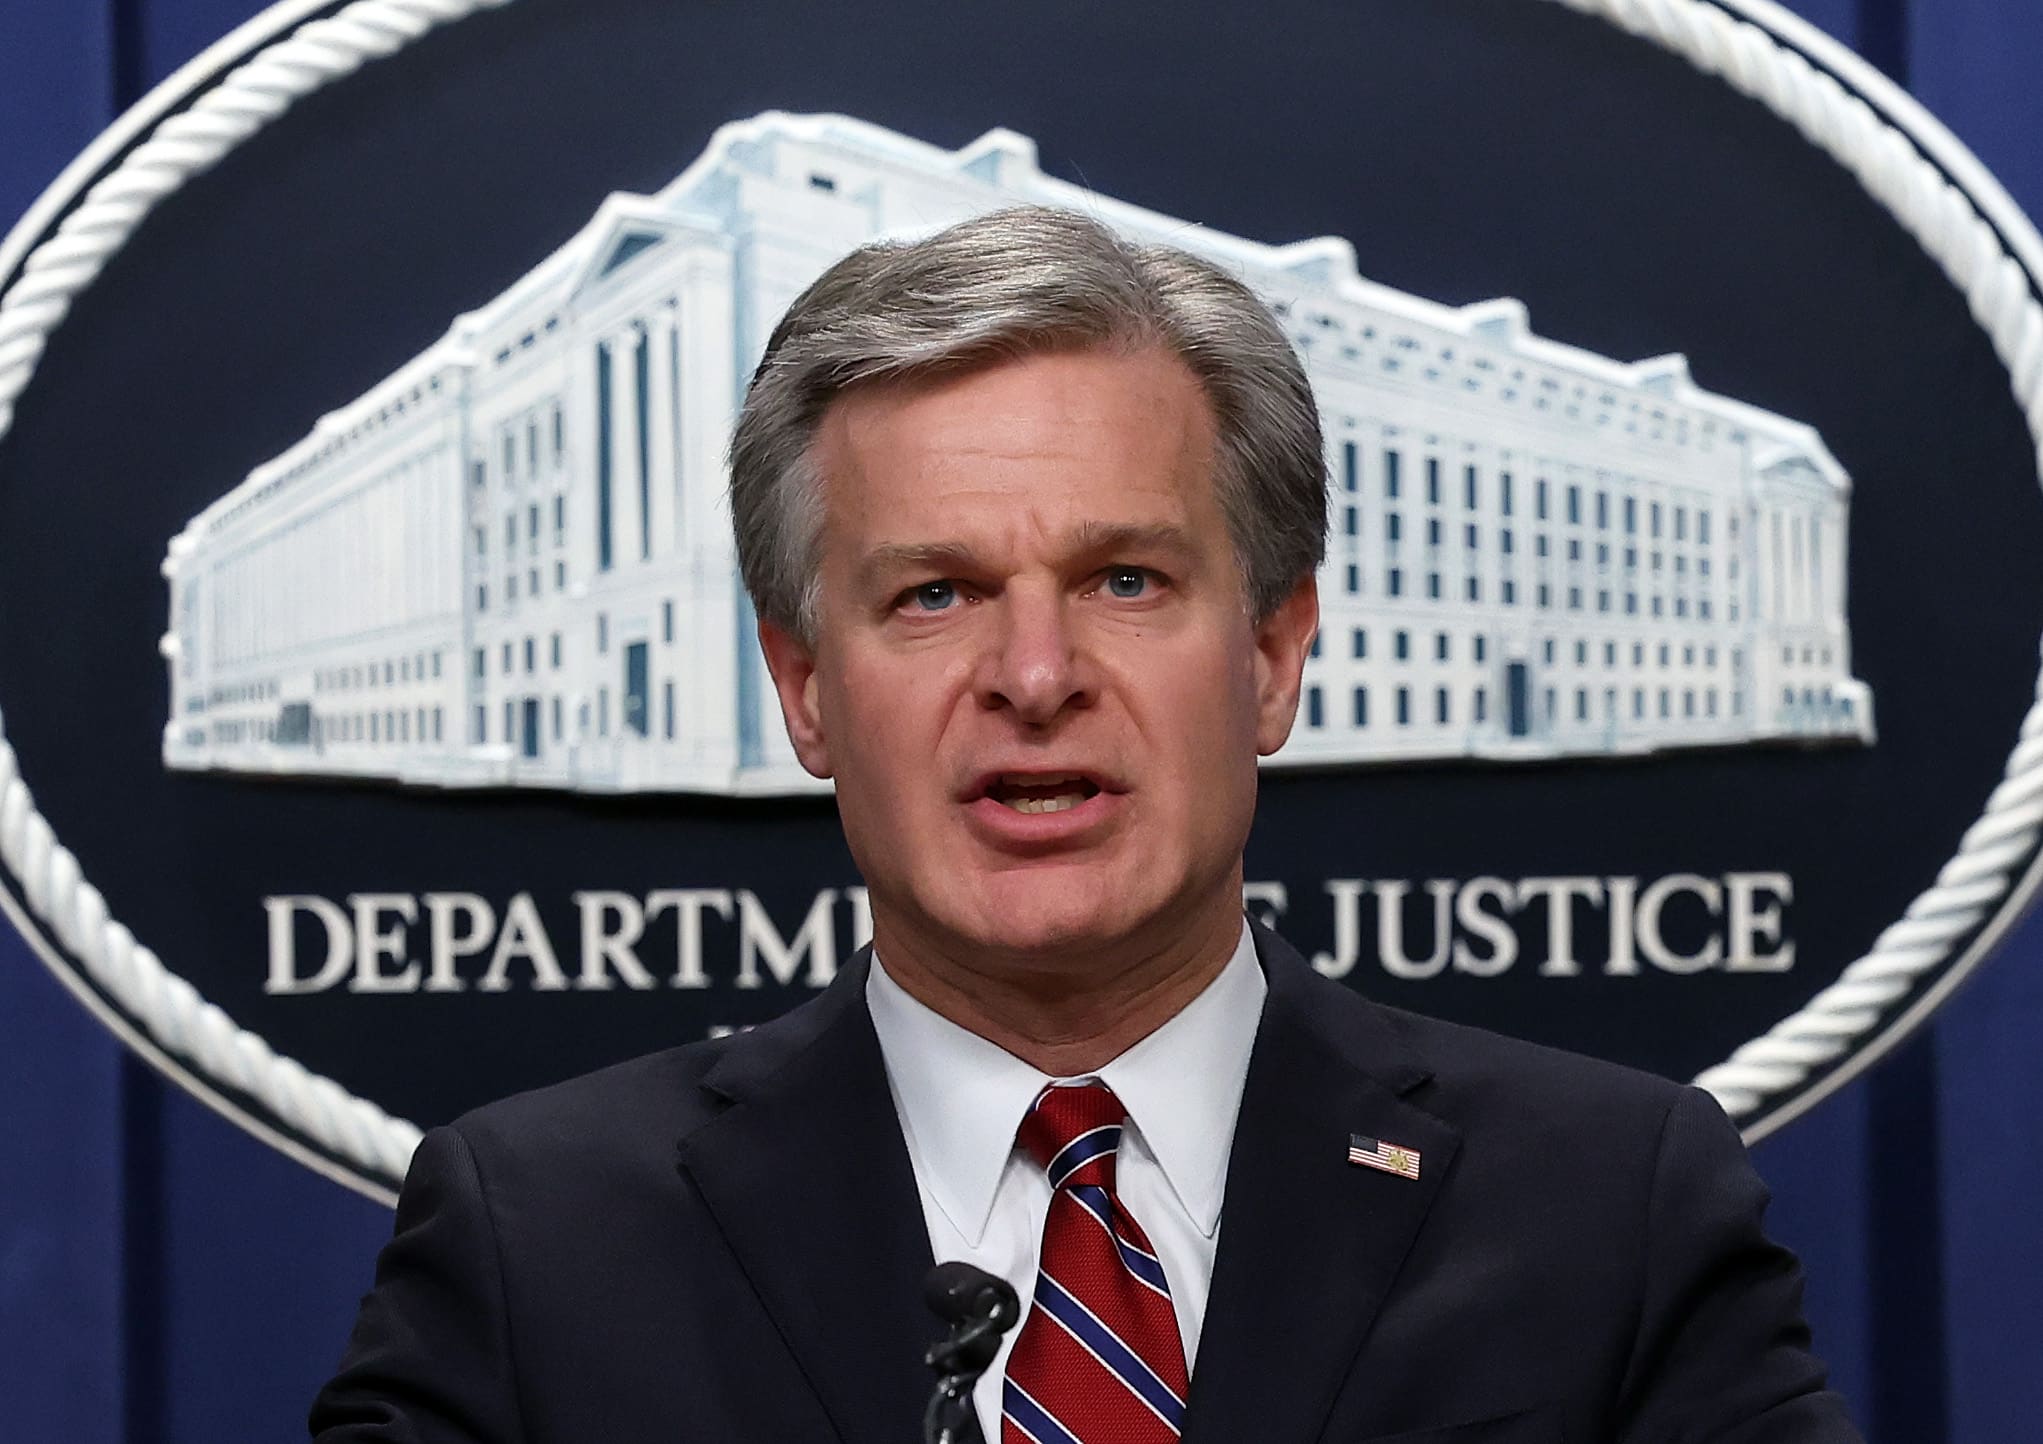 WASHINGTON, DC - OCTOBER 24: F.B.I. Director Christopher Wray speaks at a press conference at the U.S. Department of Justice on on October 24, 2022 in Washington, DC. The Justice Department announced it has charged 13 individuals, including members of the Chinese intelligence and their agents, for alleged efforts to unlawfully exert influence in the United States for the benefit of the government of China. (Photo by Kevin Dietsch/Getty Images)